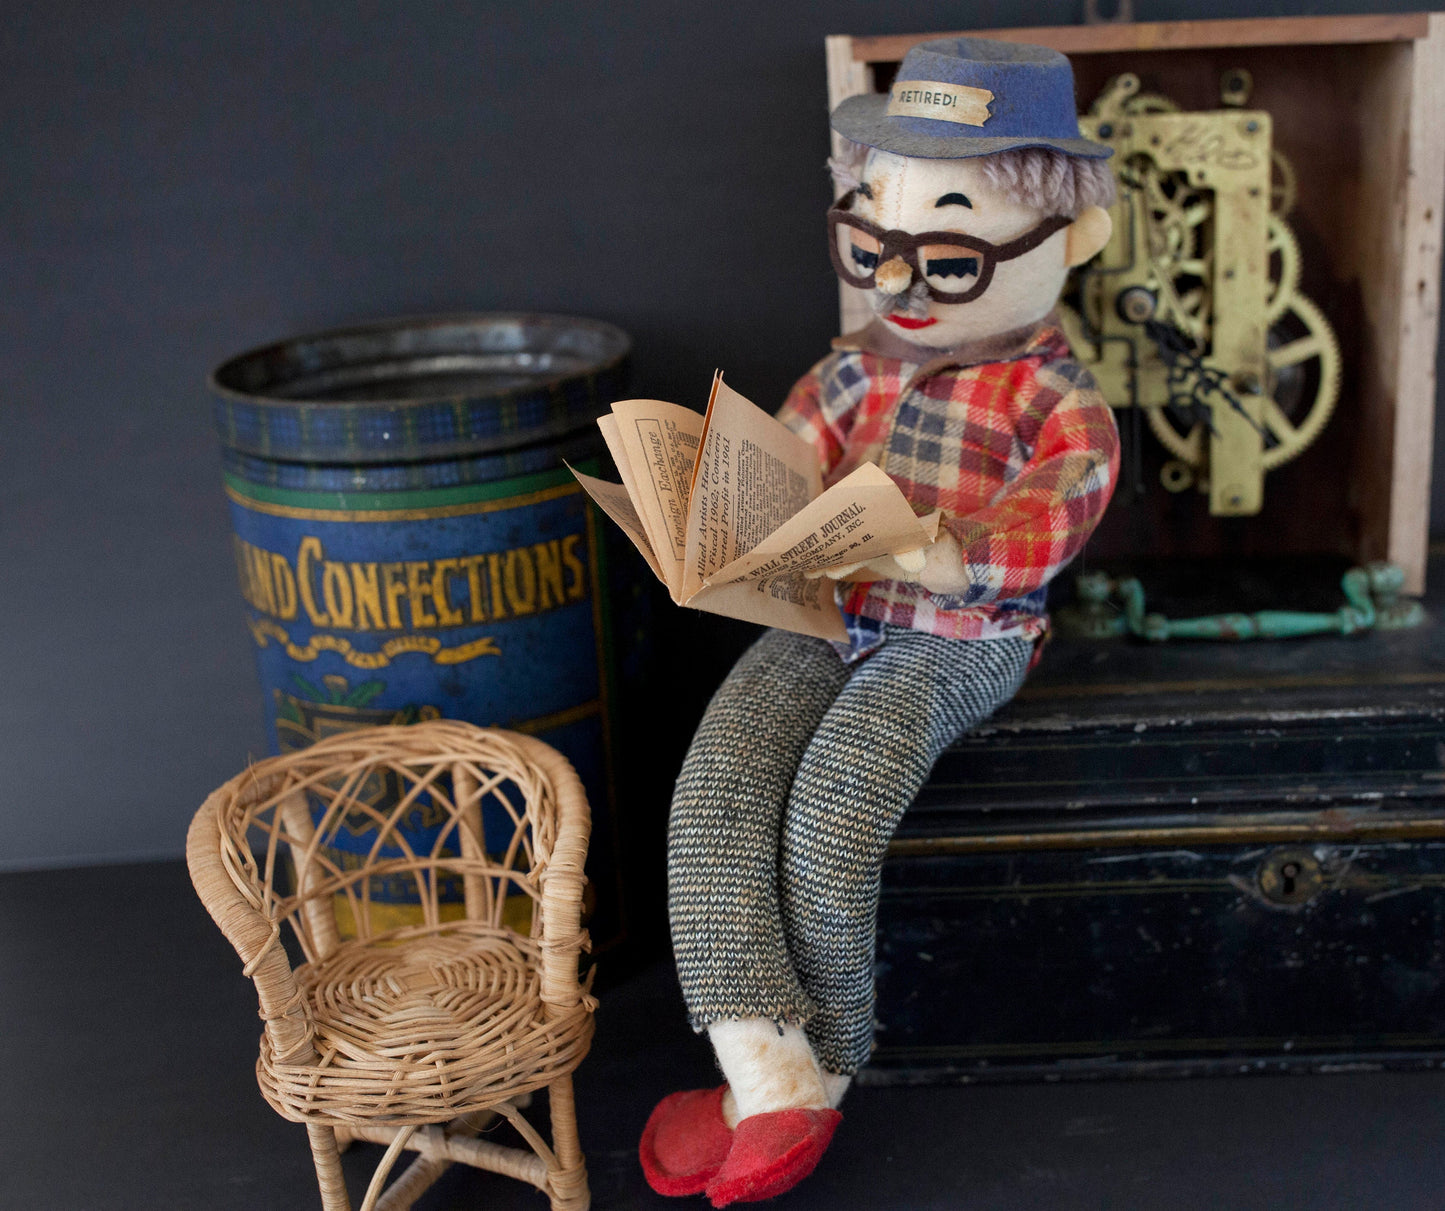 Vintage Retired Man Doll in a Wicker Chair